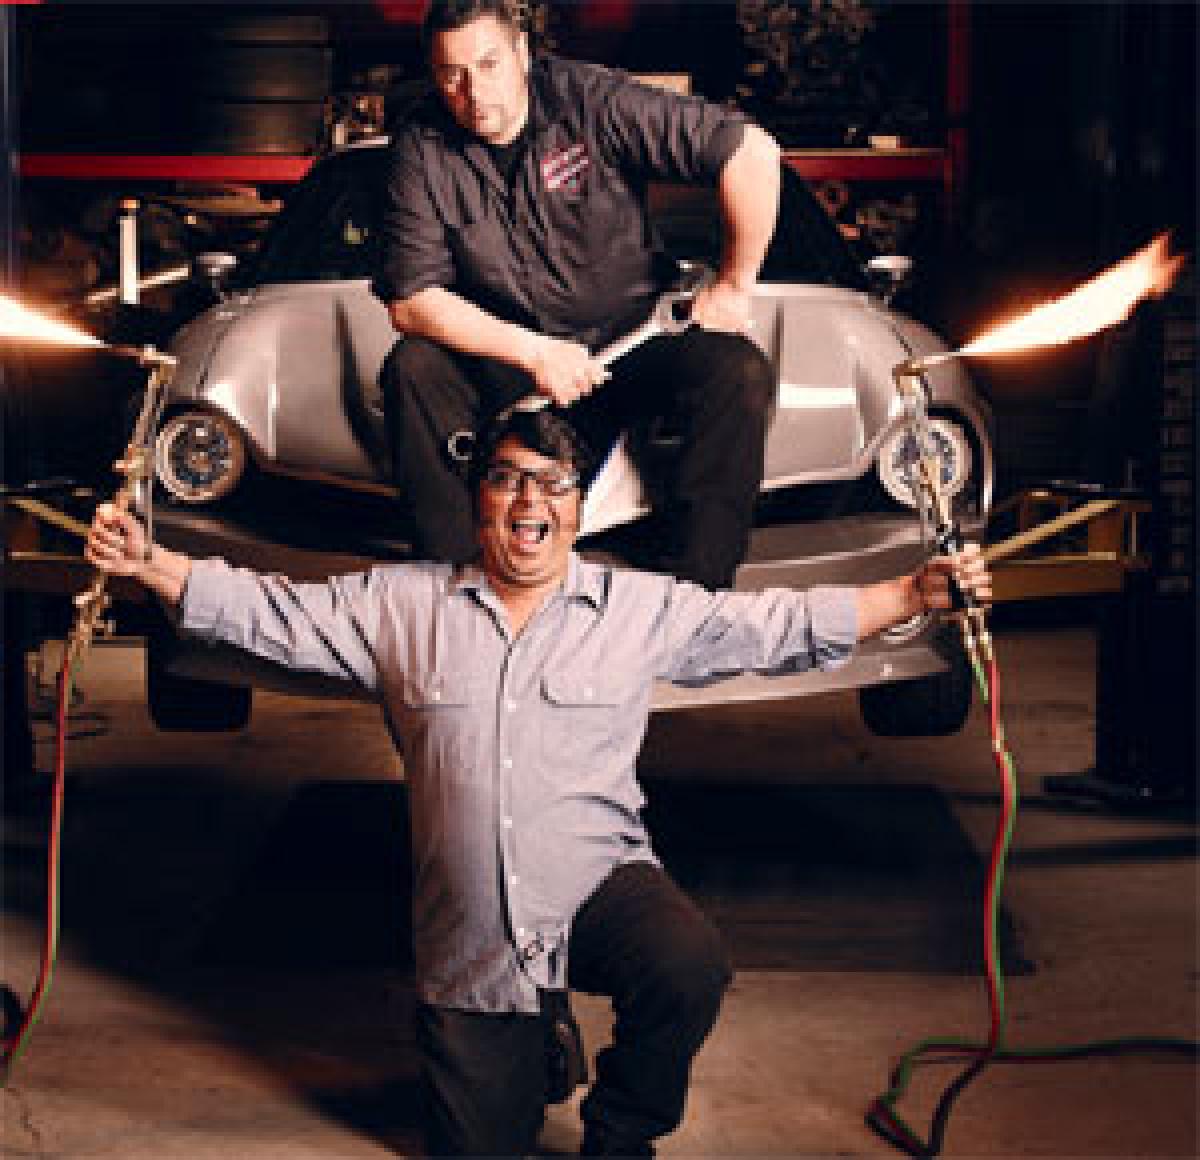 HISTORY TV18 unveils the mechanics and artistry behind customised cars